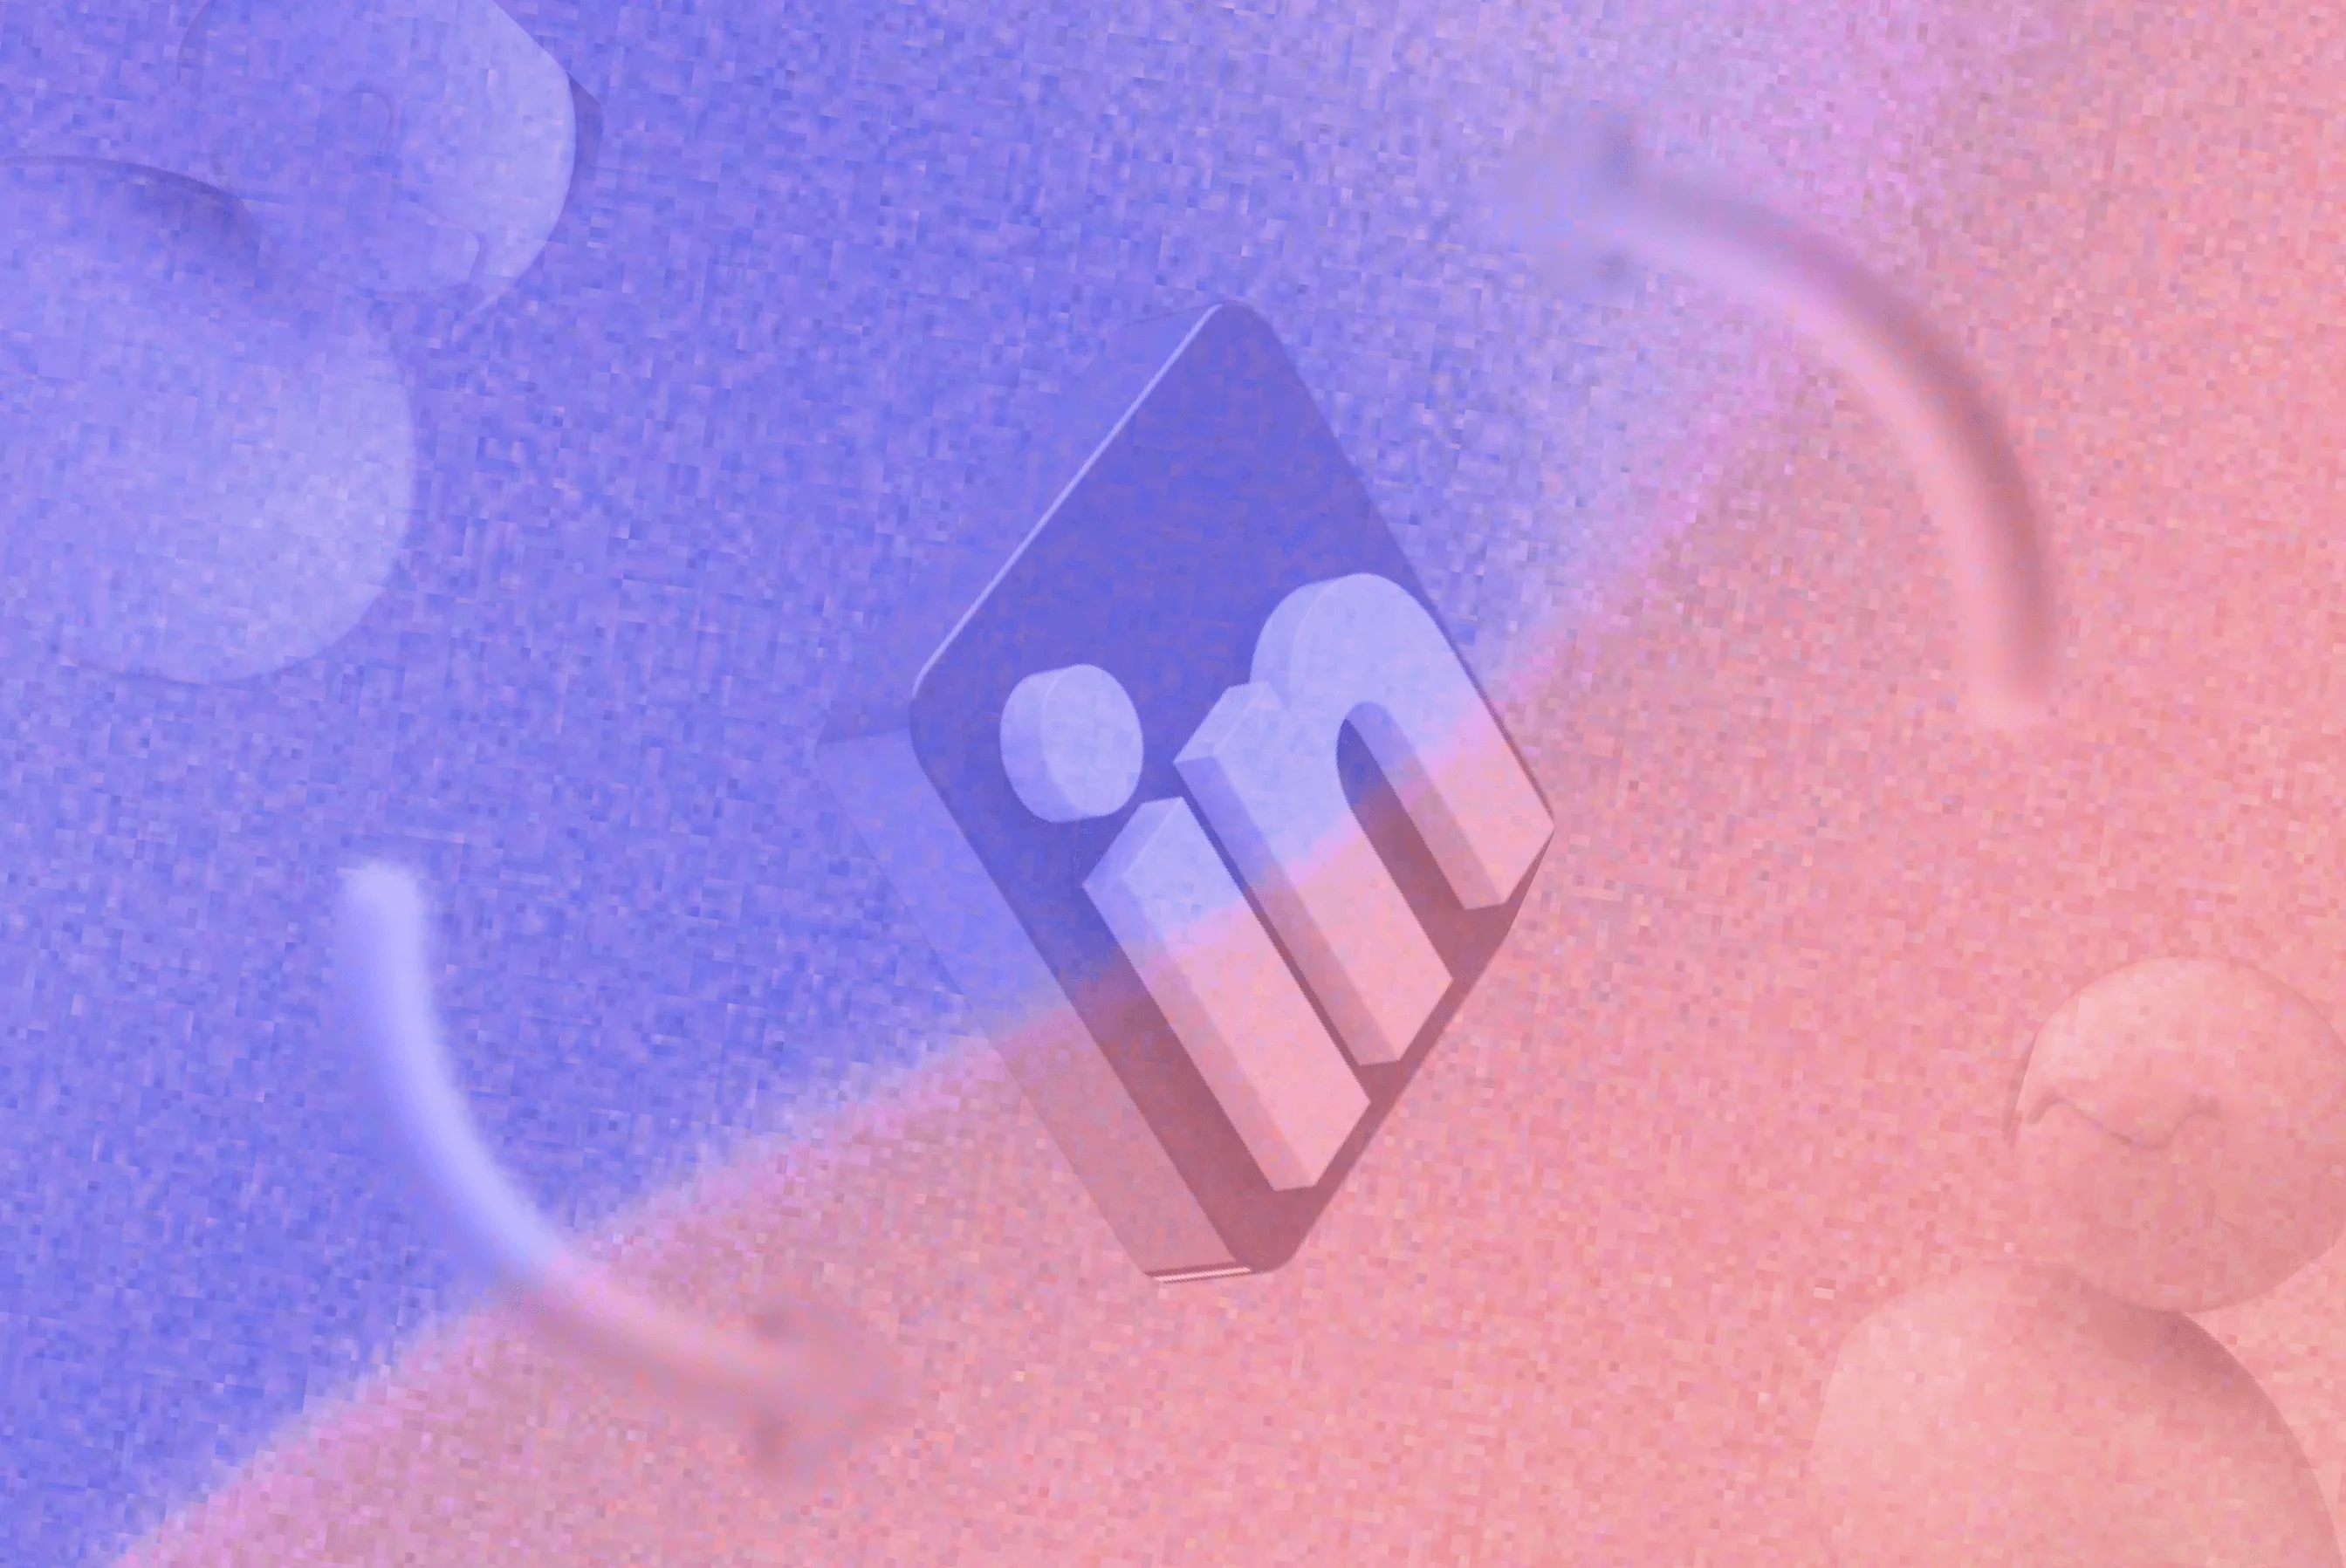 How to Manage Multiple LinkedIn Accounts Without Getting Restricted